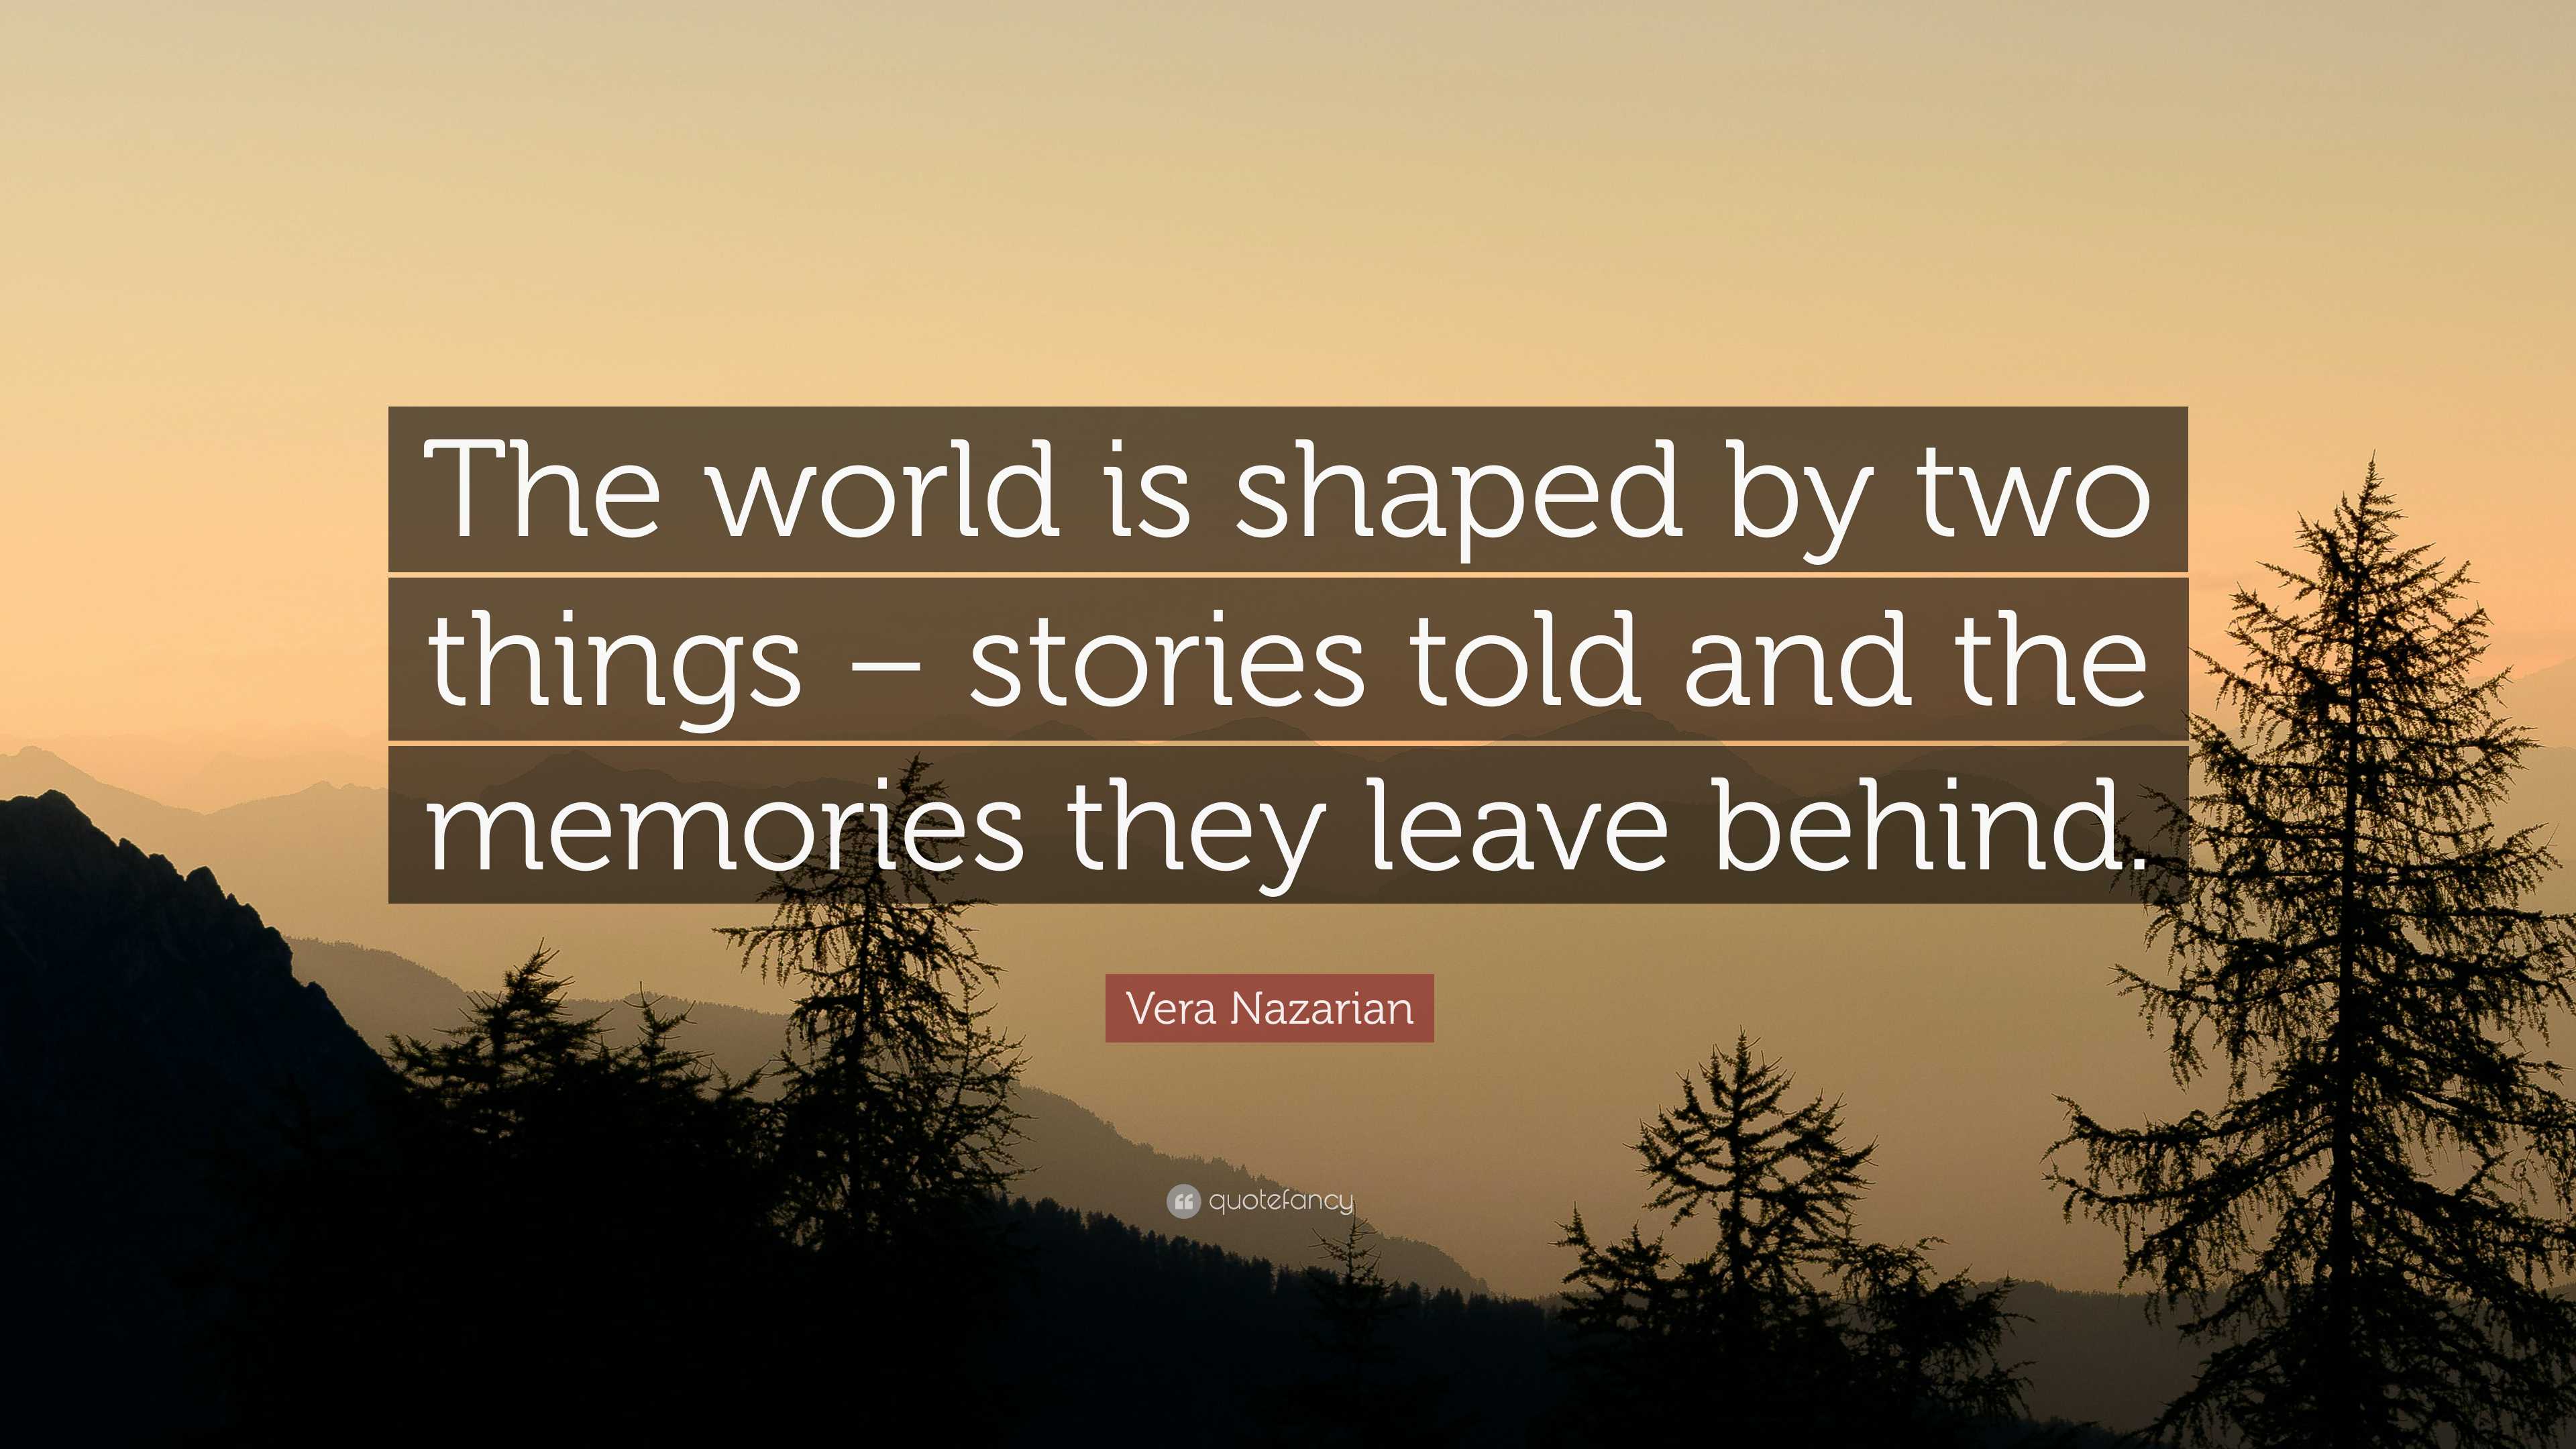 Vera Nazarian Quote: “The world is shaped by two things – stories